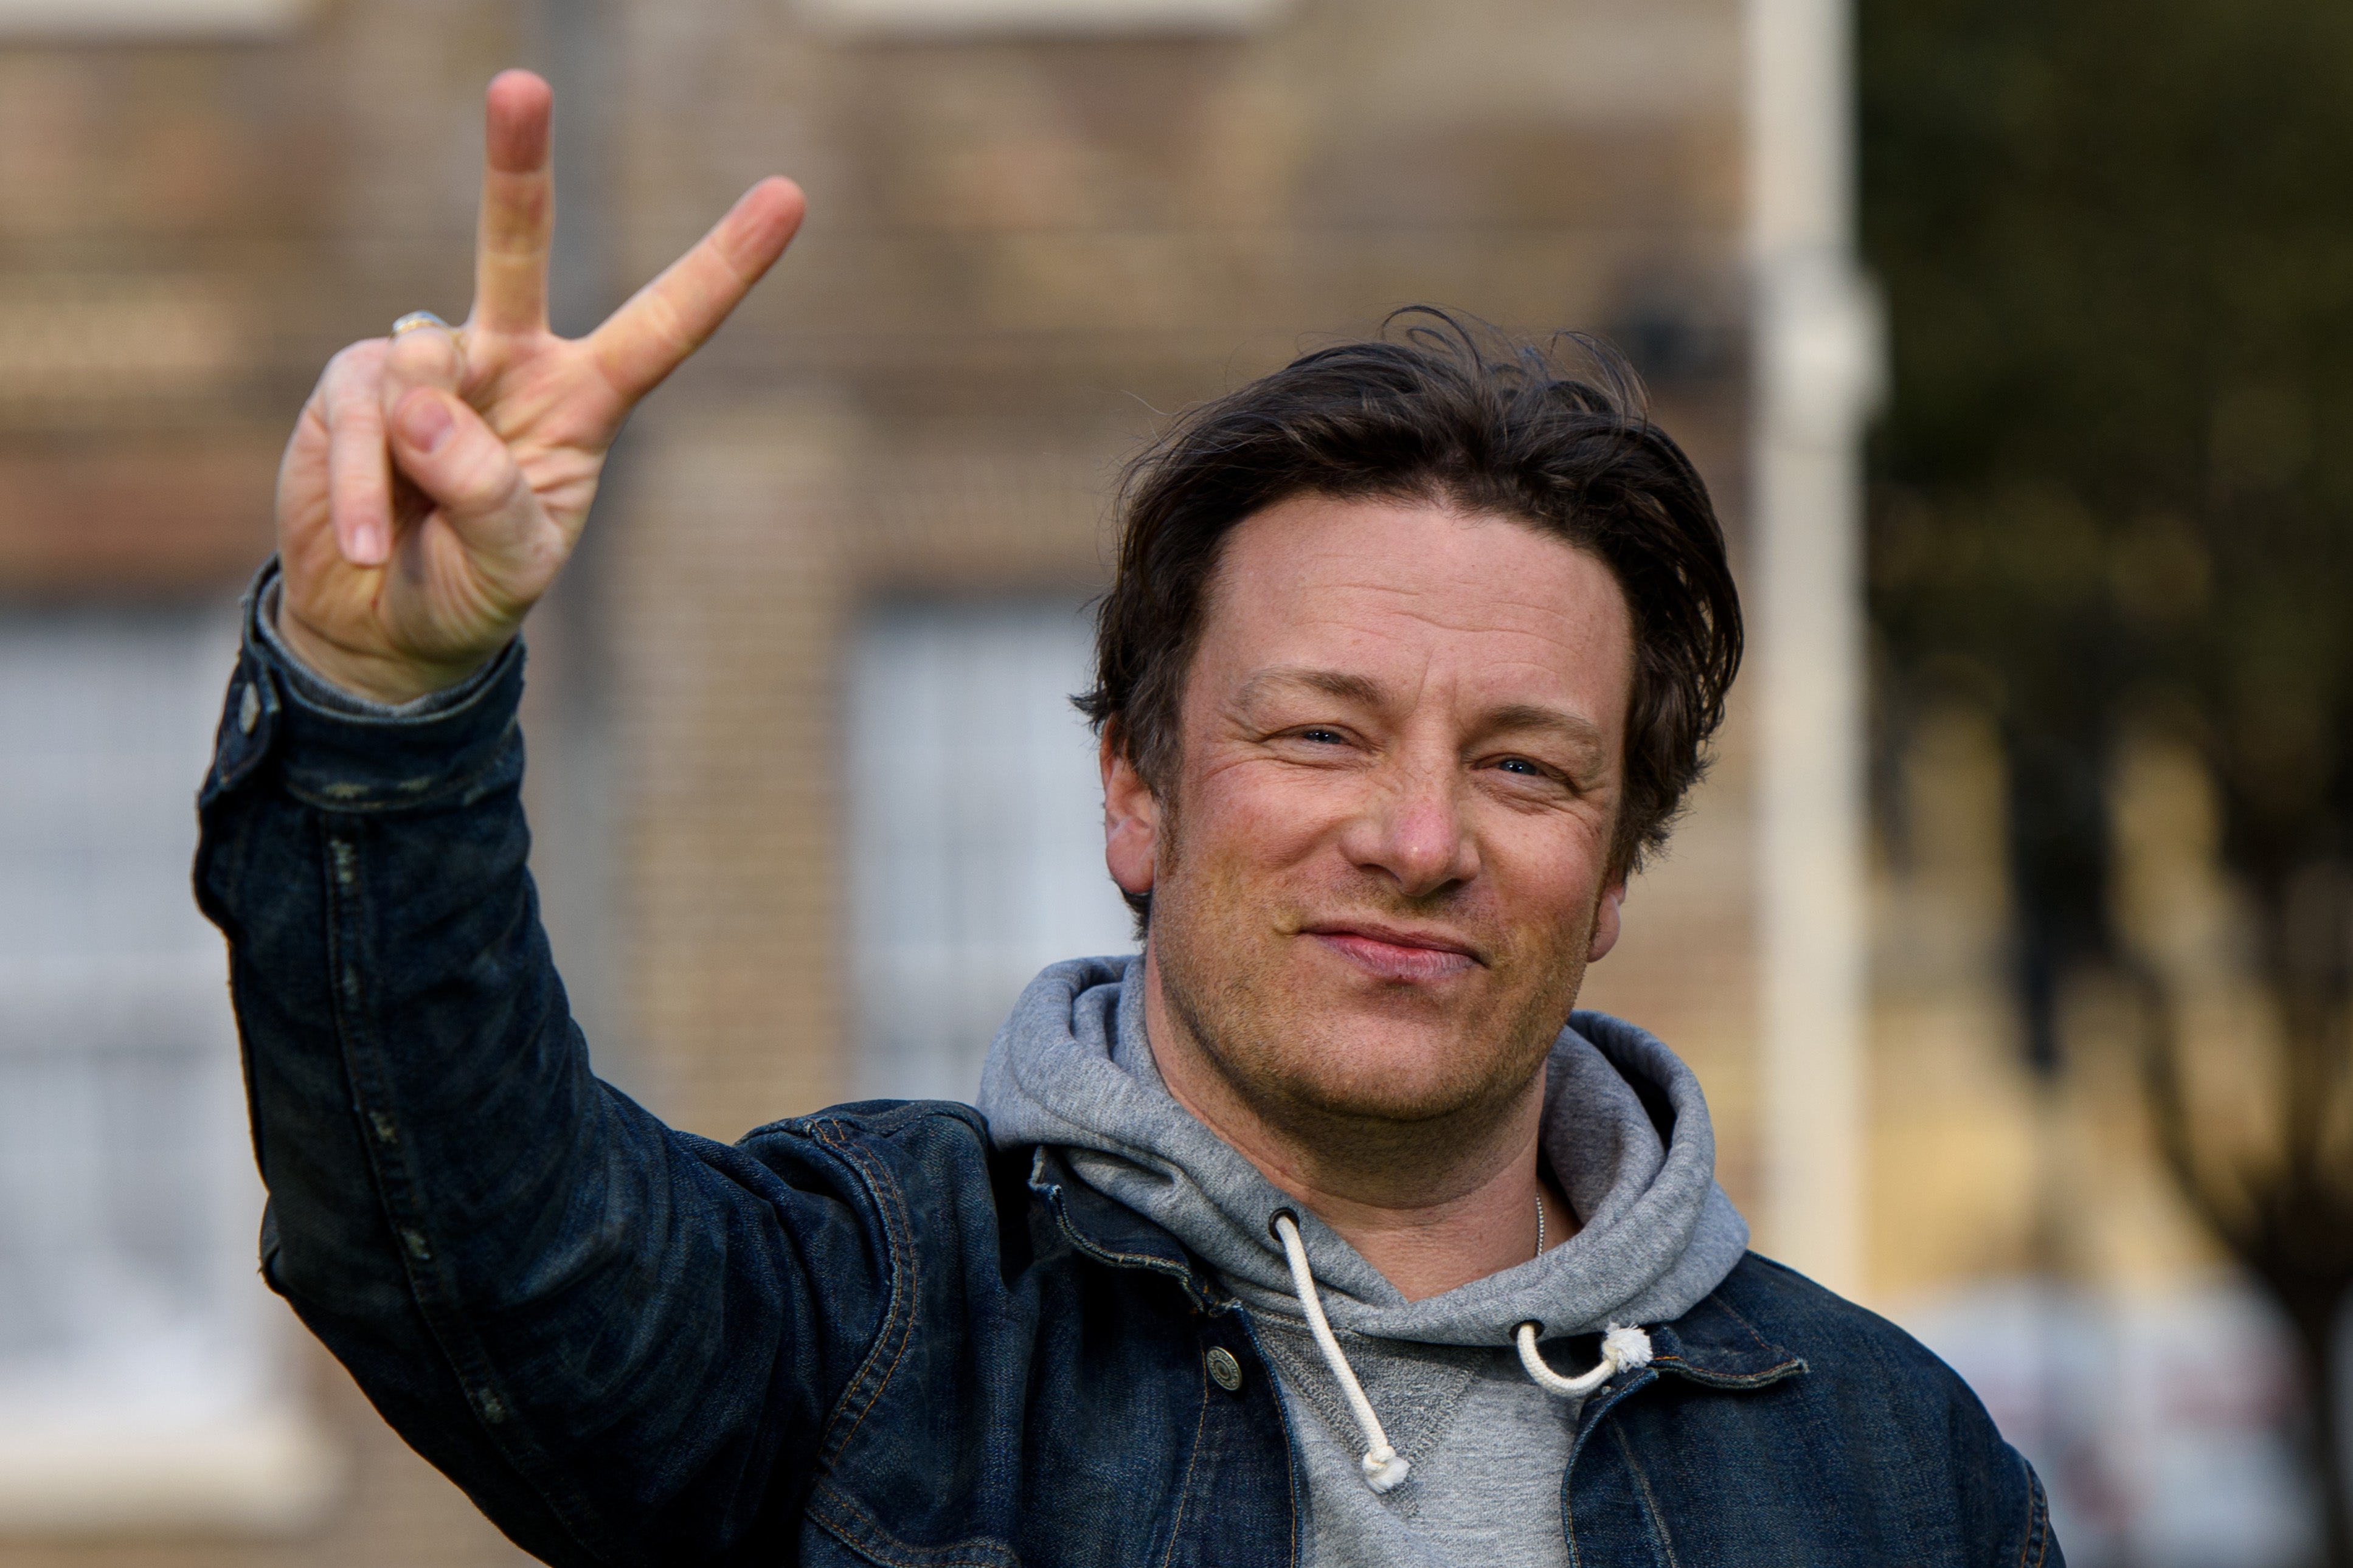 Jamie Oliver guest-edited BBC Radio 4’s ‘Today’ programme